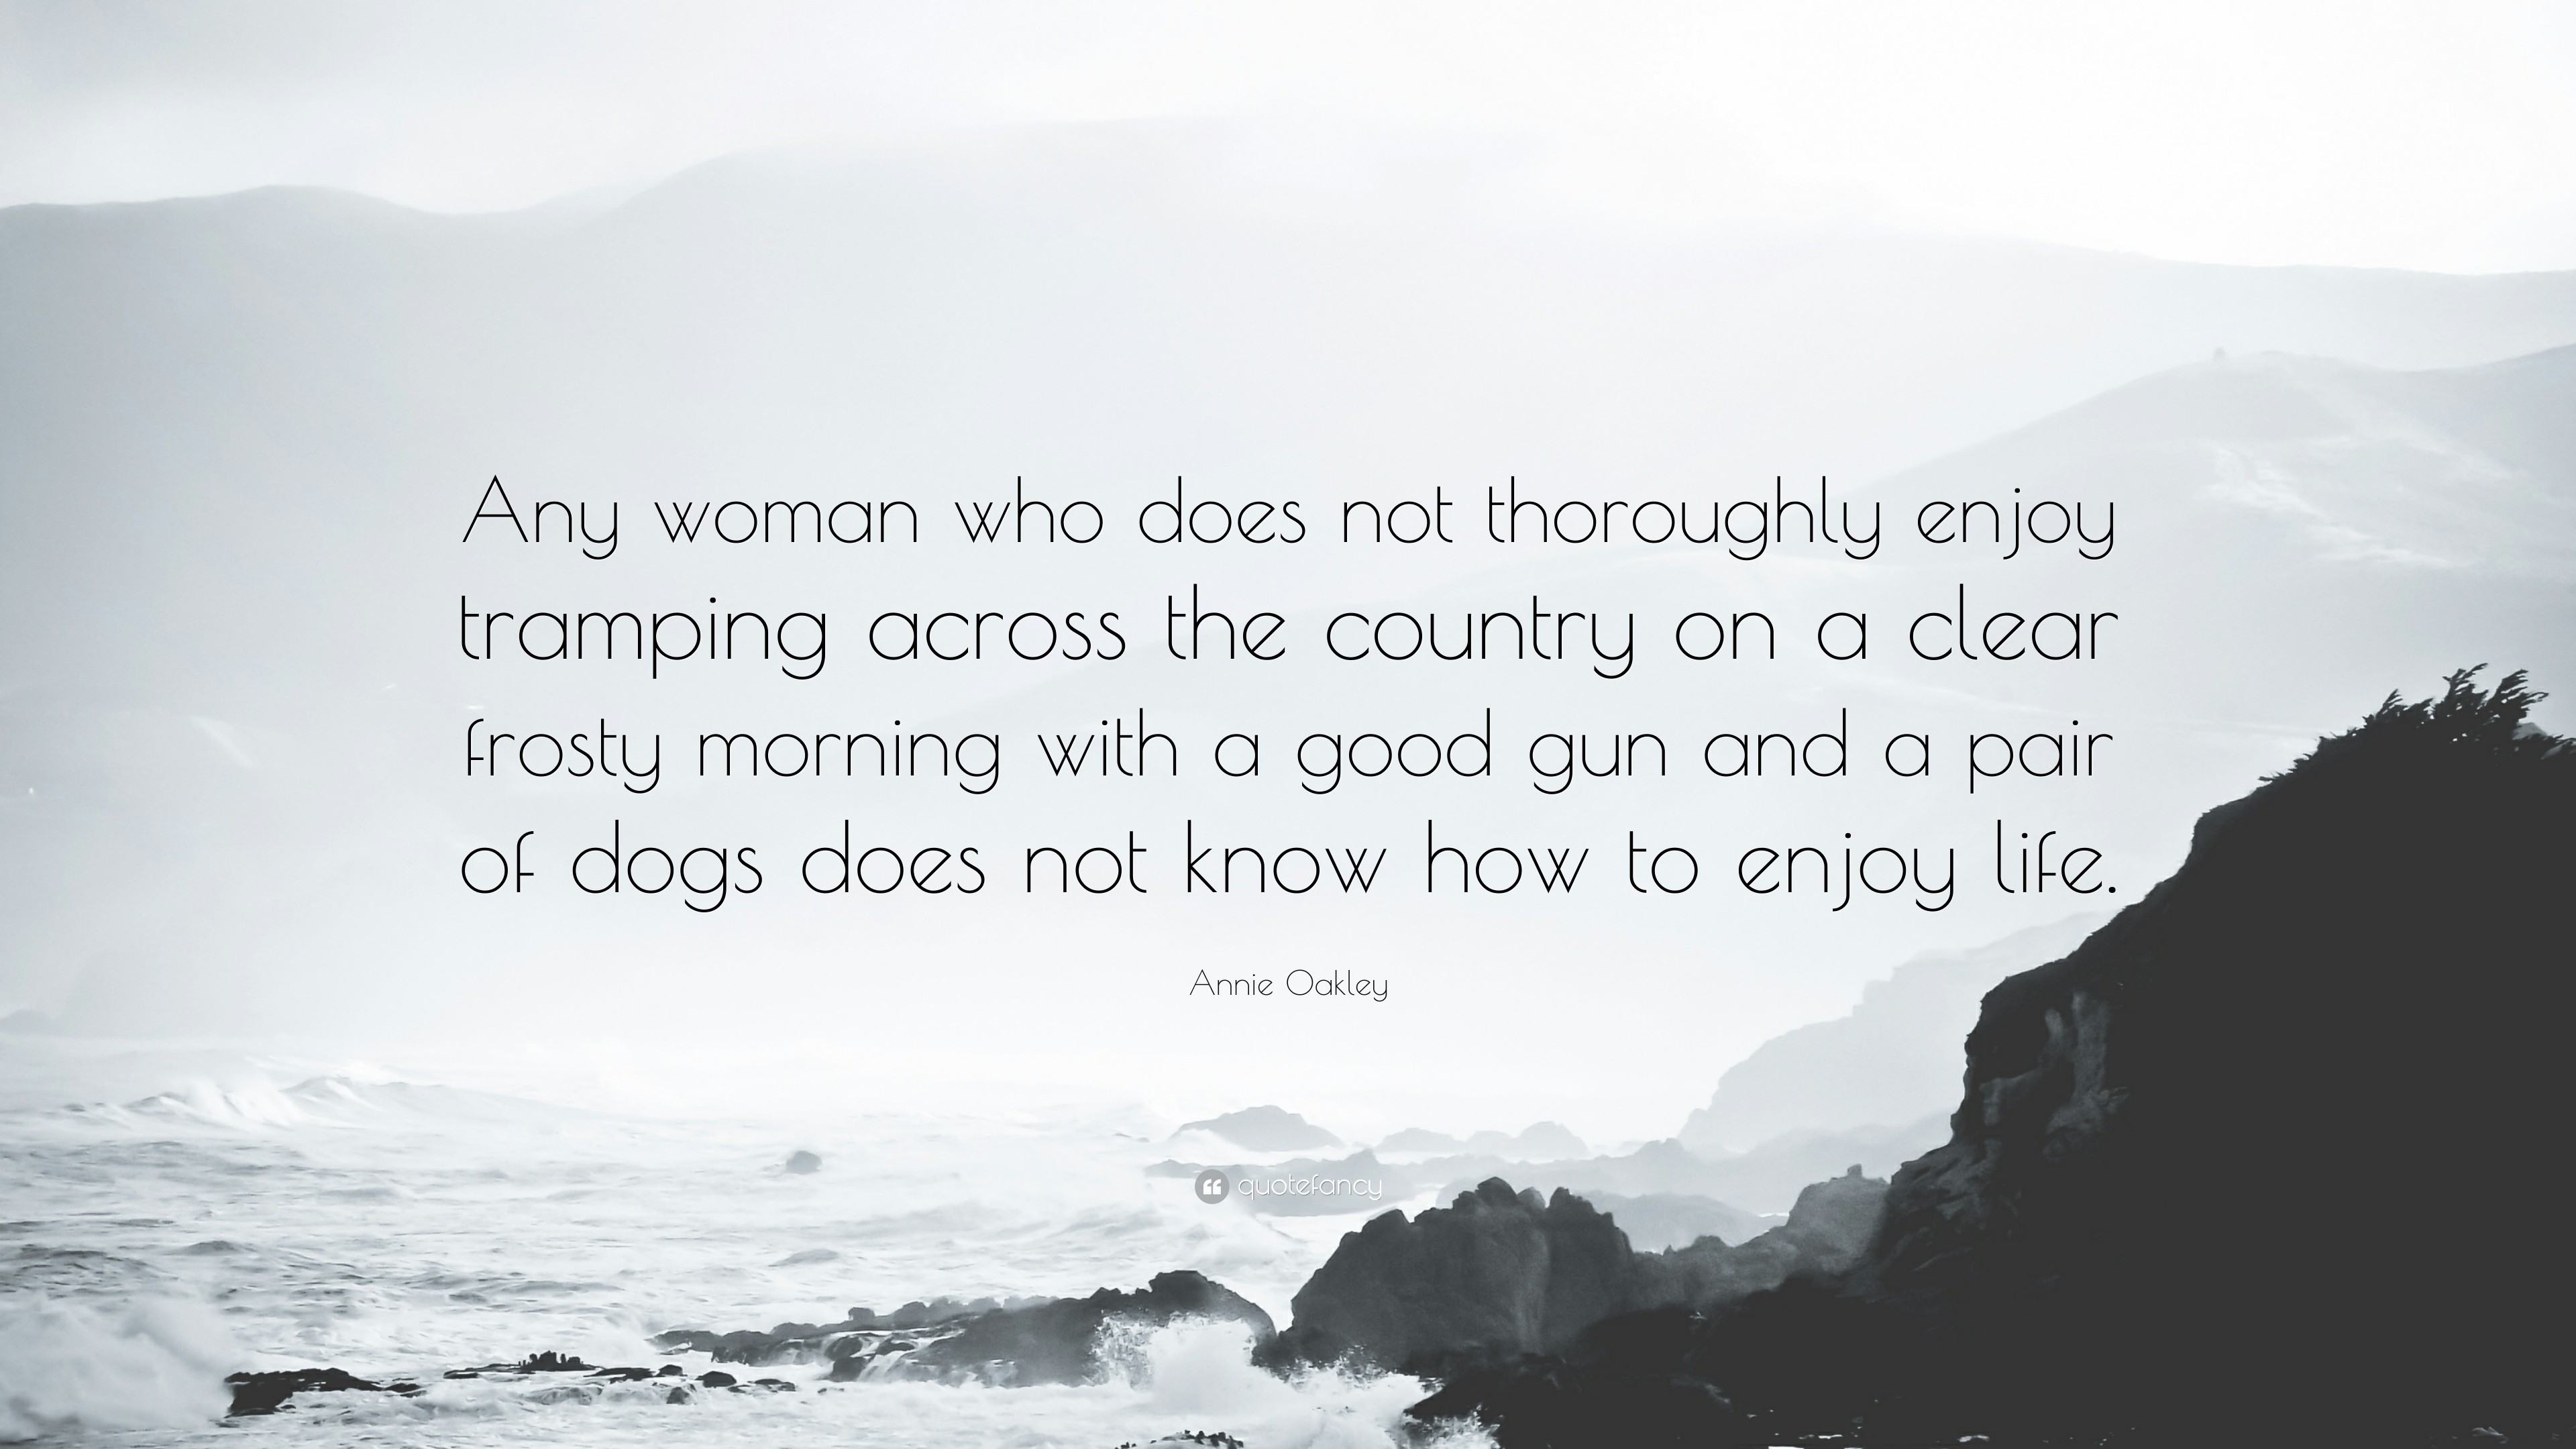 3840x2160 Annie Oakley Quote: “Any woman who does not thoroughly enjoy tramping  across the country